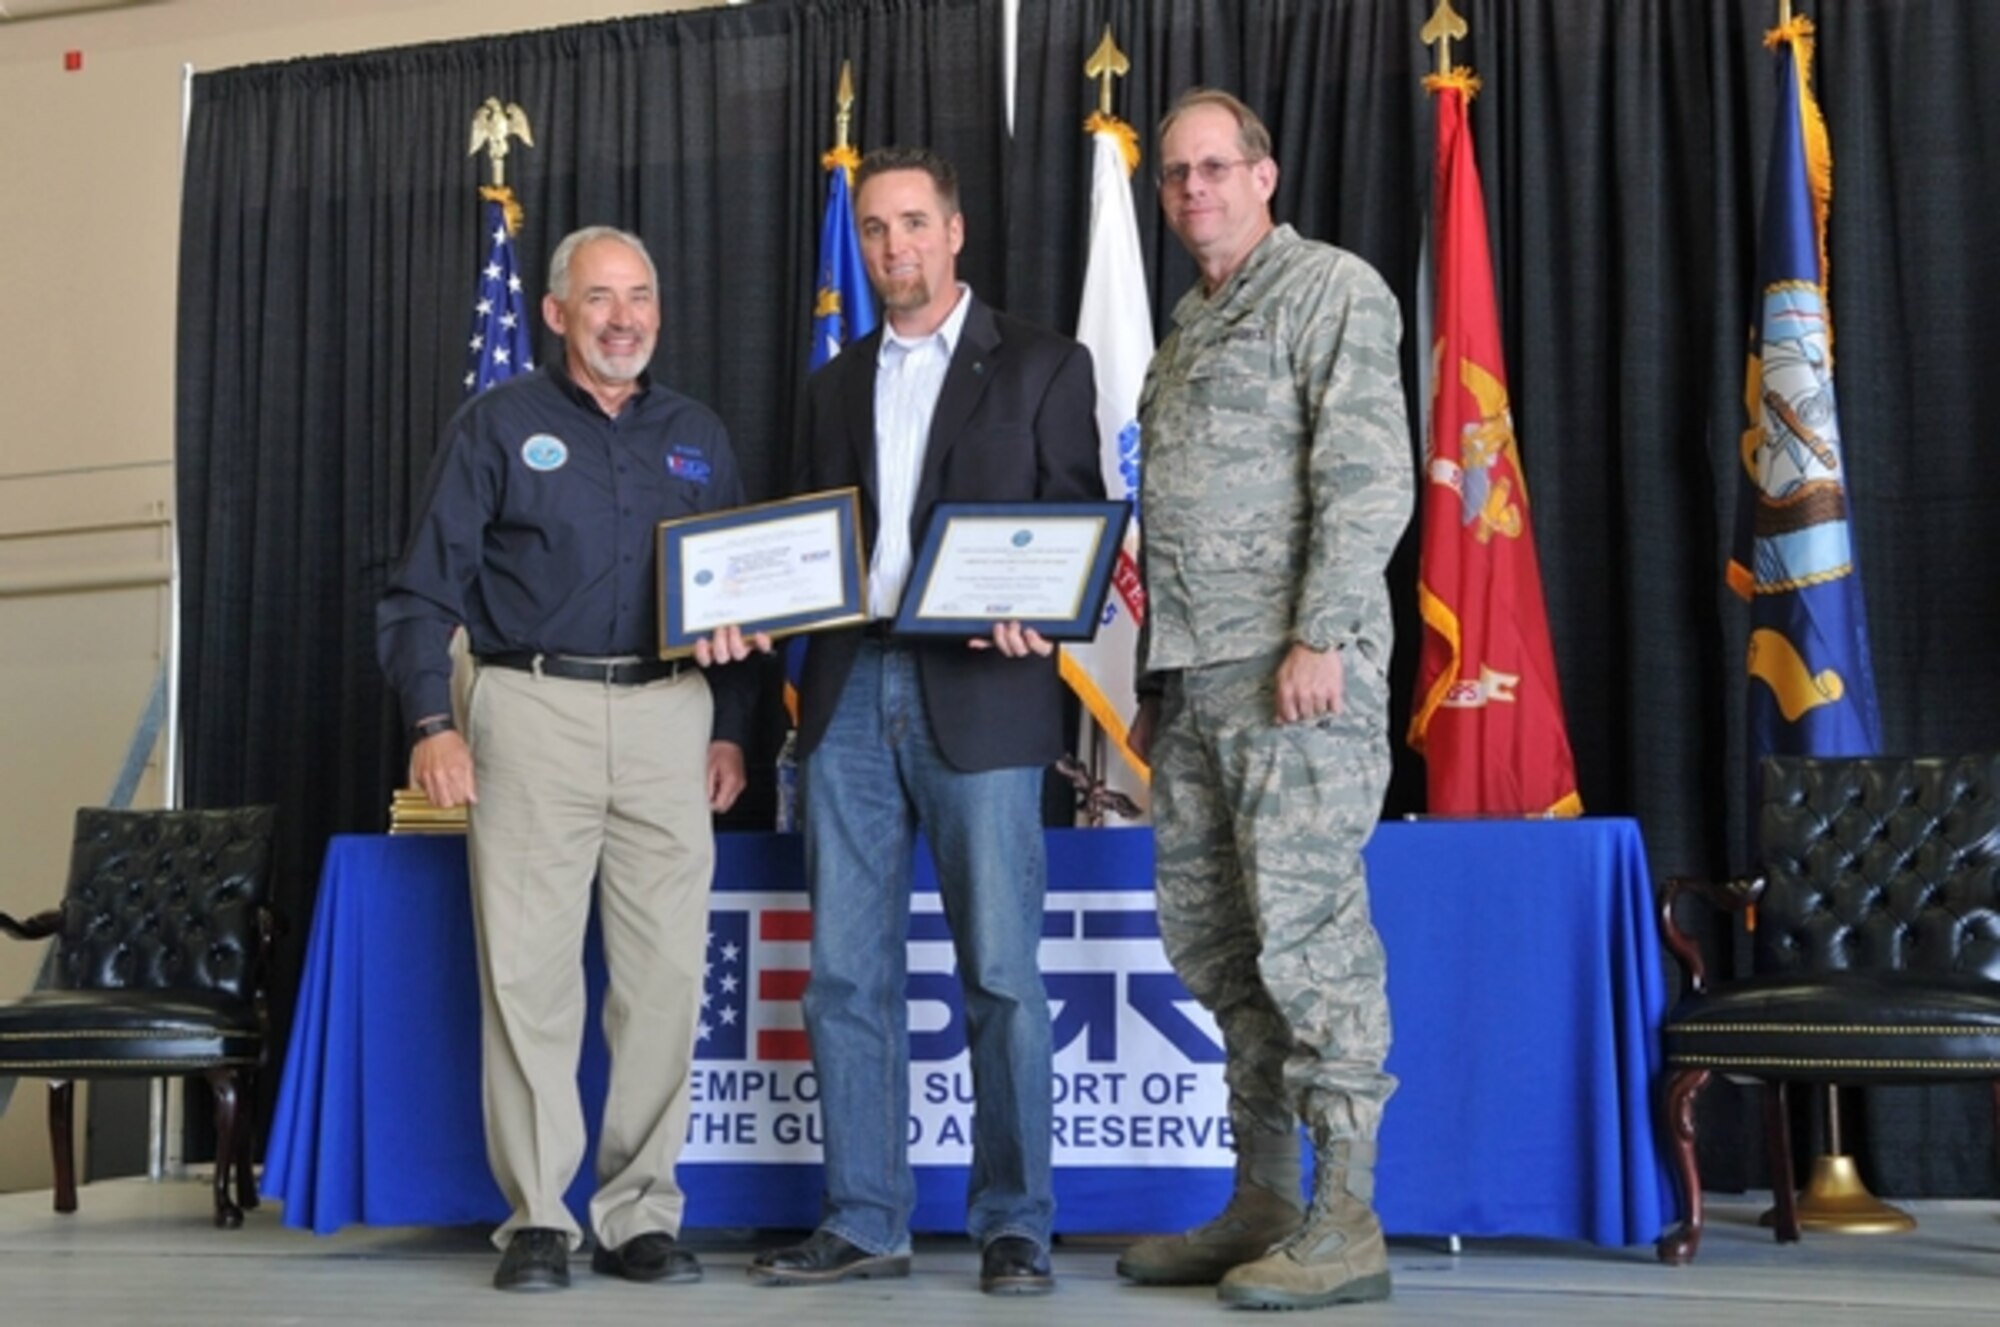 Sgt. Dan Johnson, Nevada Department of Public Safety (center), accepts the Patriot Award from NV ESGR Chairman David Cantrell (left), as Brig. Gen. Burks (right) looks on.  Johnson, along with others, was recognized during the annual ESGR event at Creech Air Force Base in southern Nevada on March 10.  The event thanks and recognizes employers and the communtiy for their support of guardsmen and reservists.  USAF Photo by Tech. Sgt. Emerson Marcus (released). 
